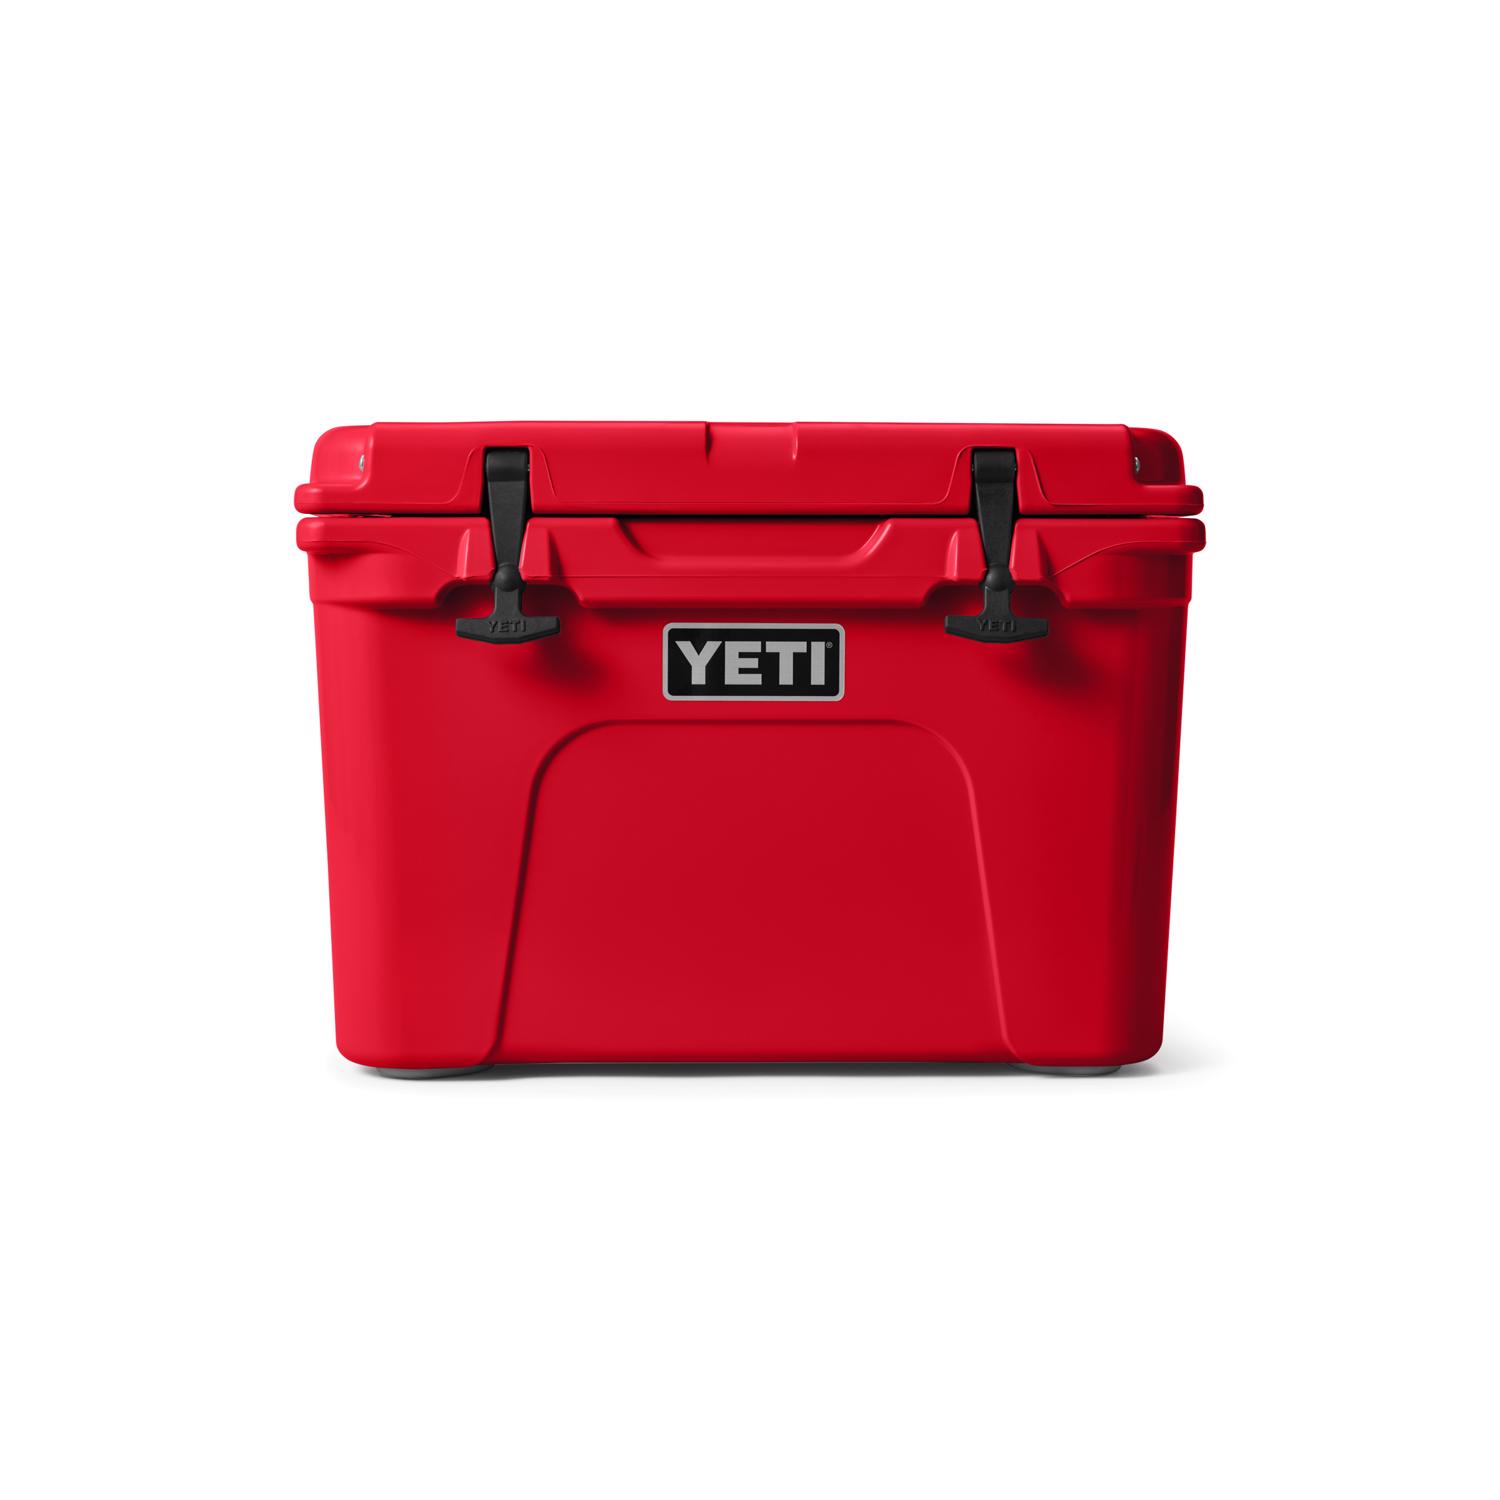 YETI Roadie 20 Pink LIMITED EDITION cooler for Sale in Charlotte